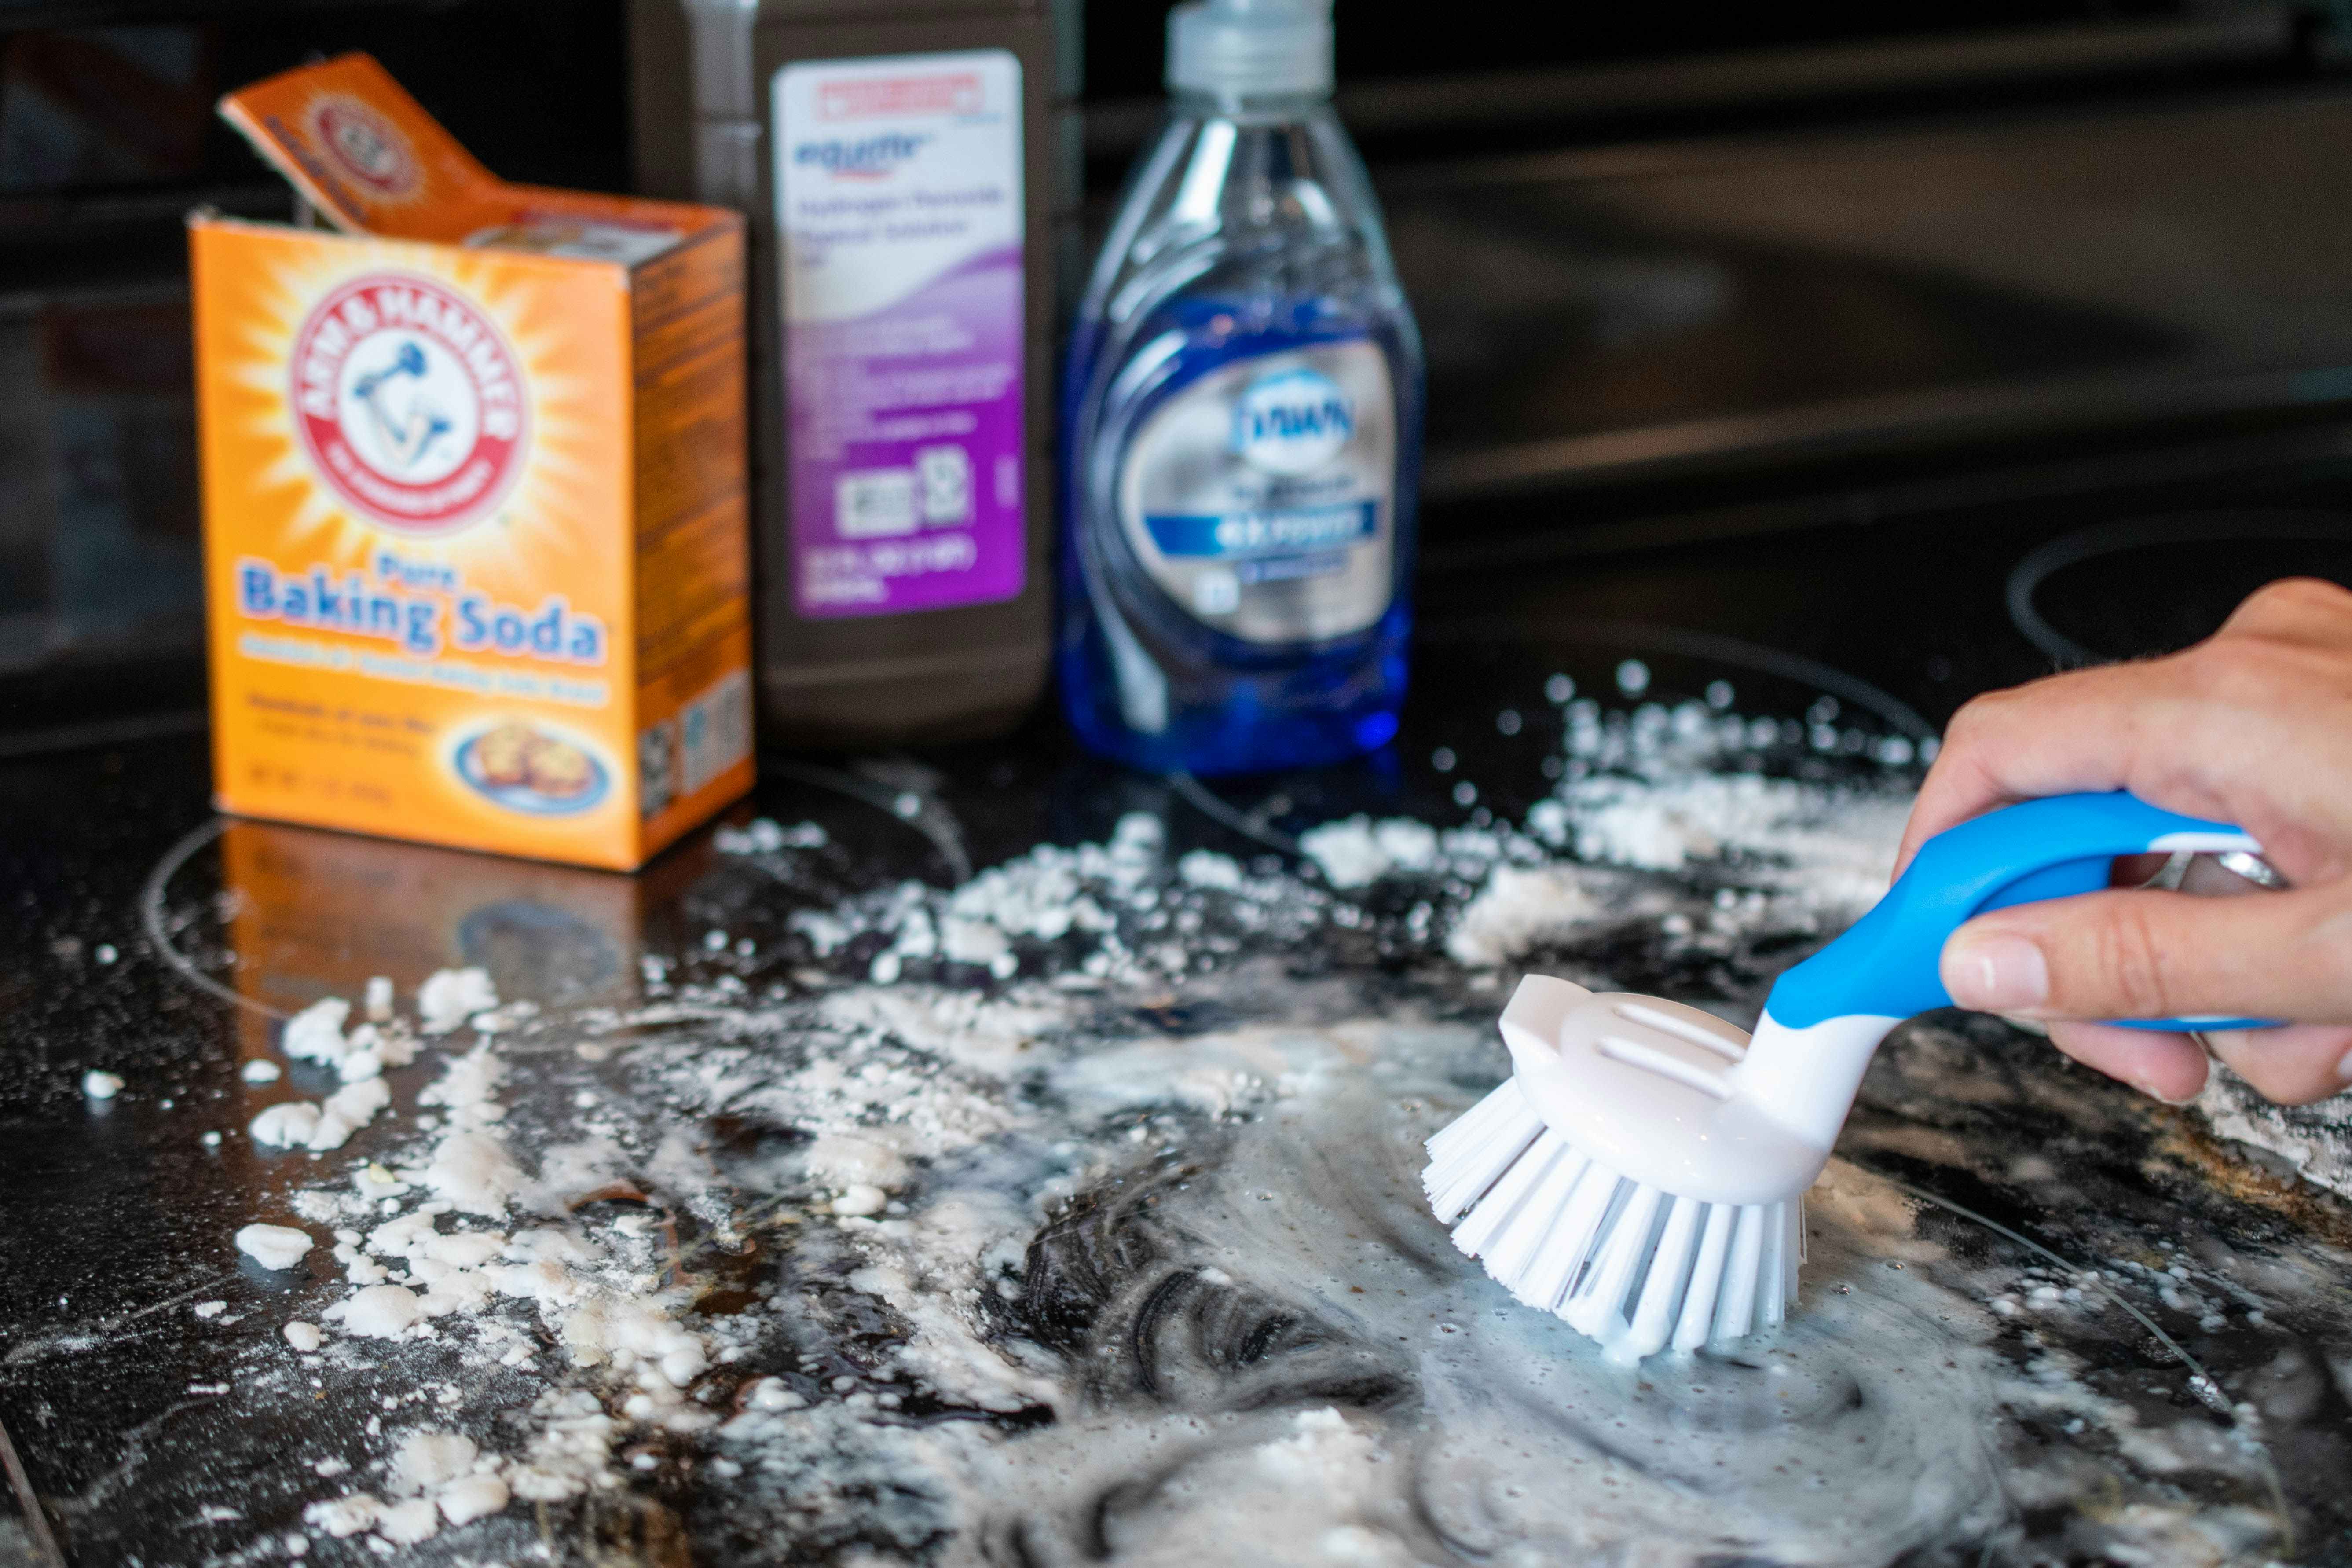 25 Baking Soda Uses You've Never Heard Of - The Krazy Coupon Lady